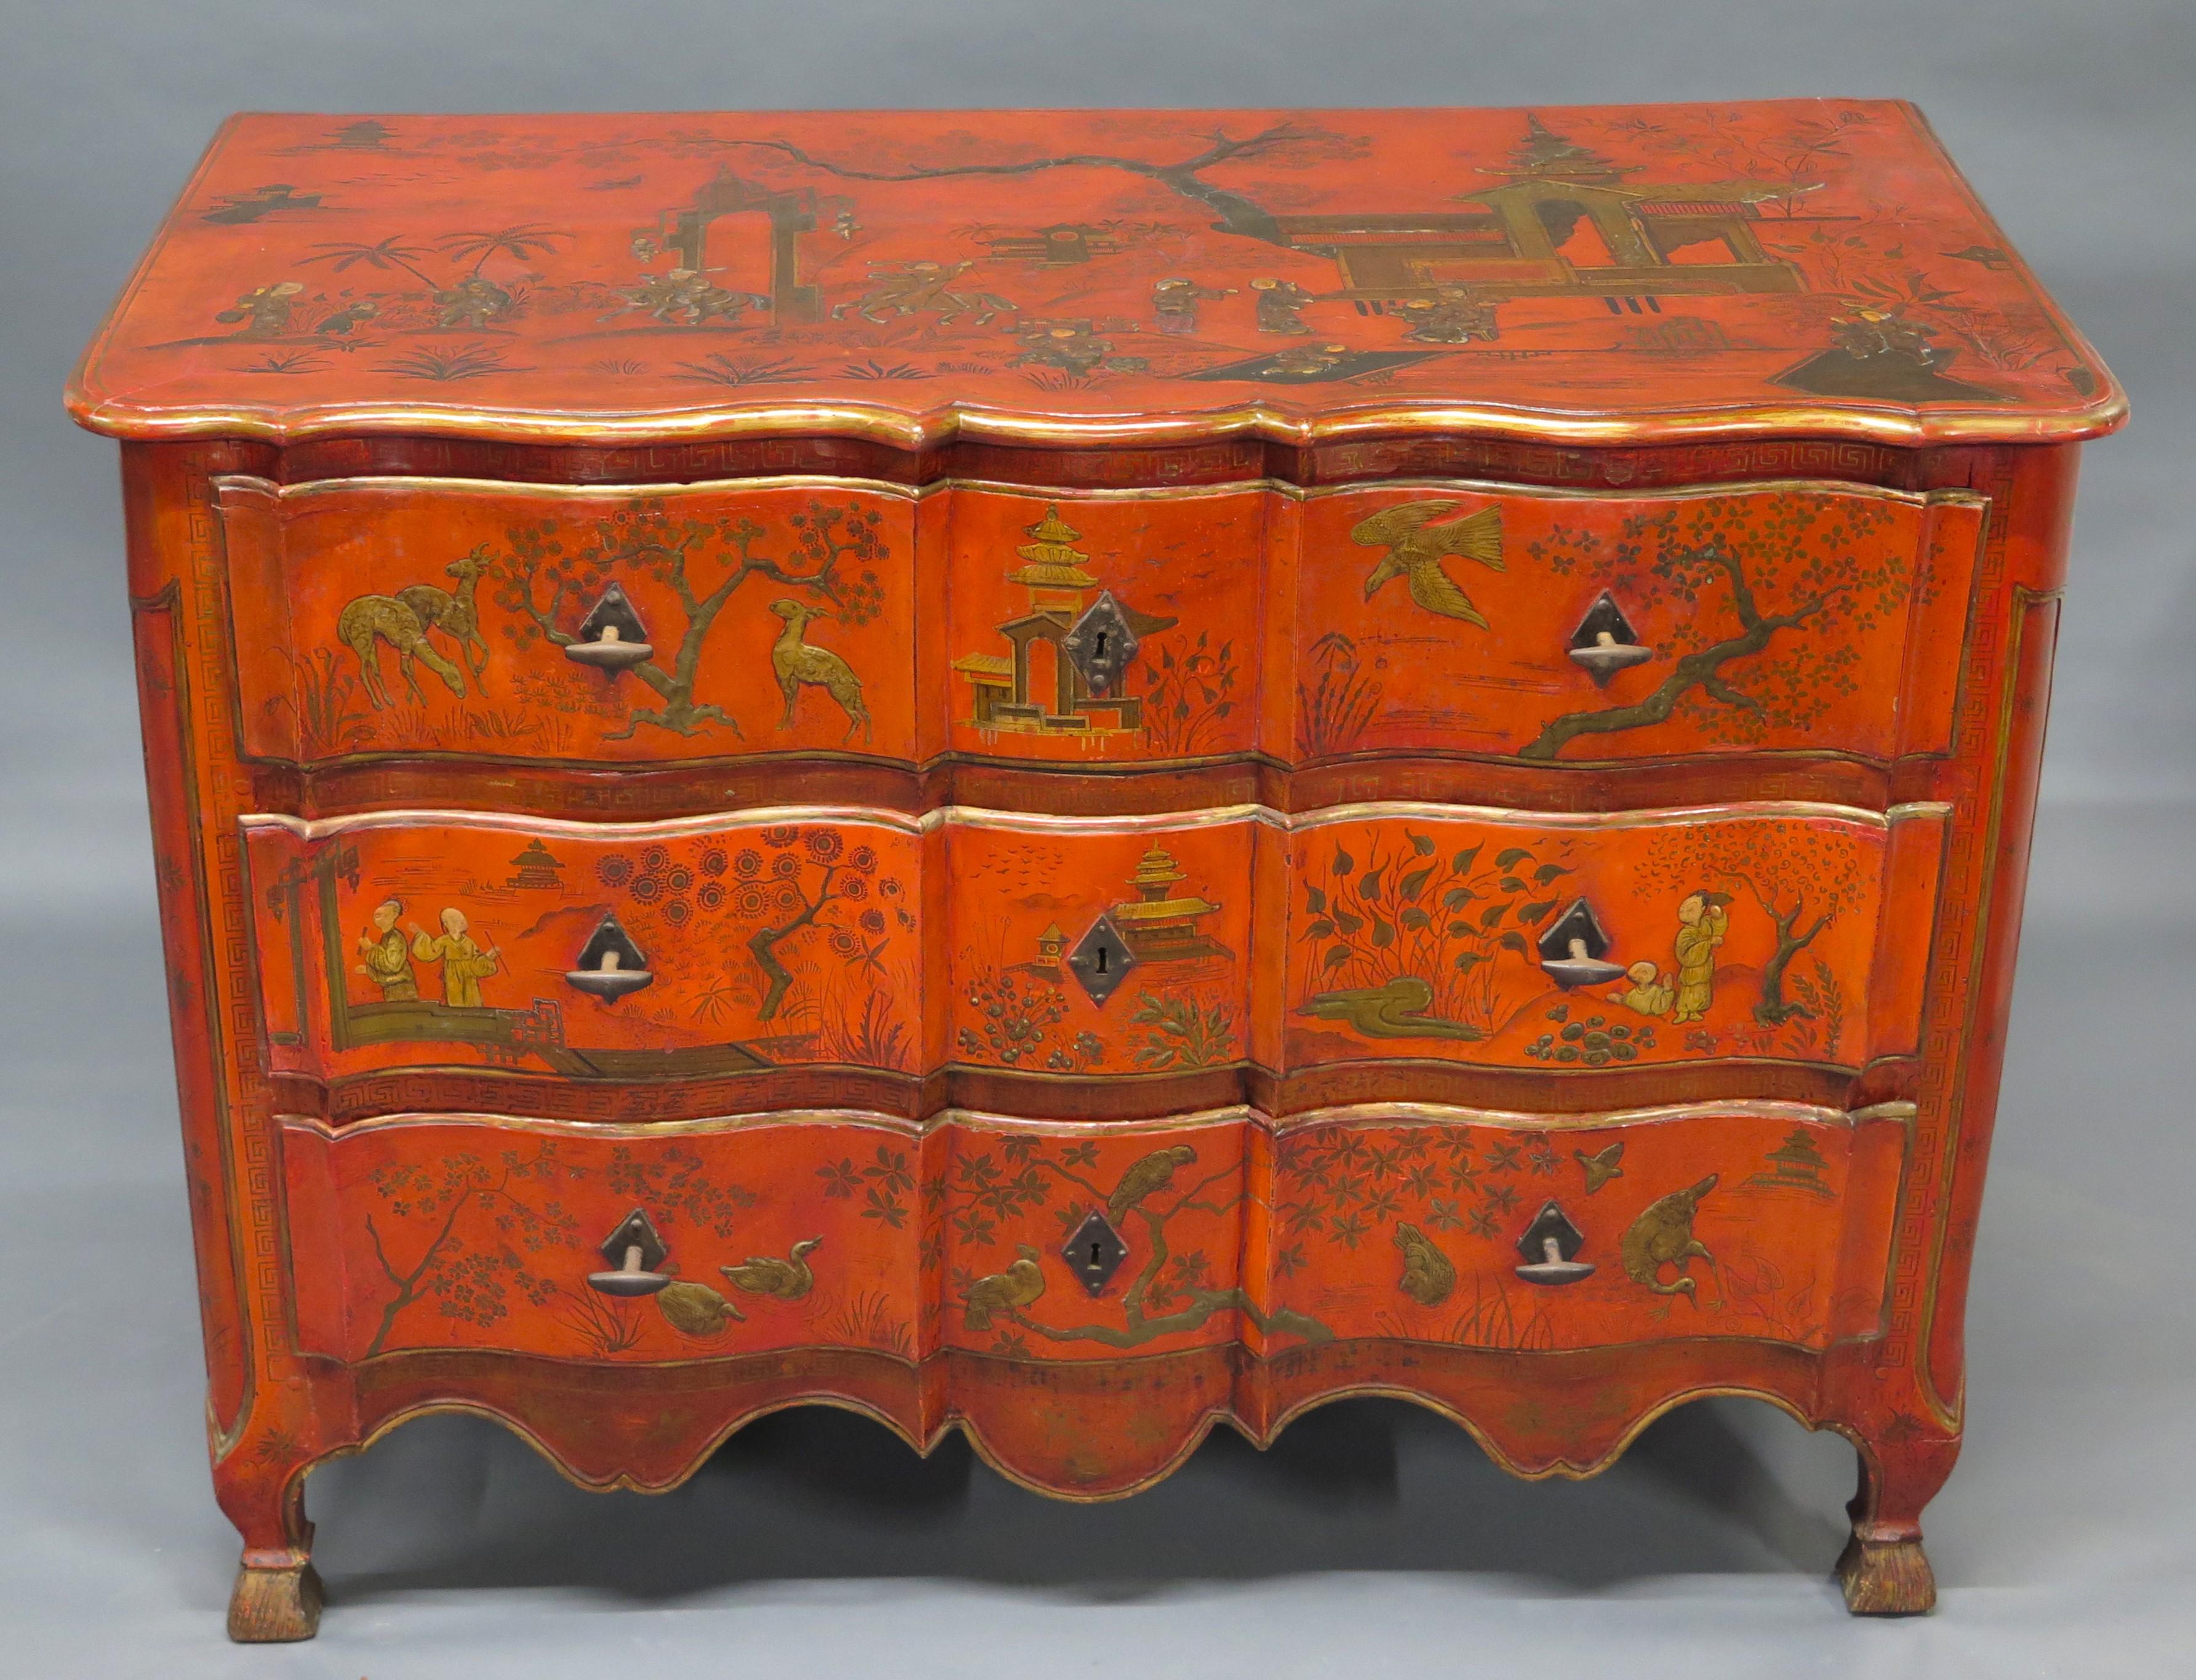 a Continental red chinoiserie decorated commode / chest of drawers, the shaped top with a scenic figural landscape, above the three conforming drawers further decorated with figures and flora and fauna, beautiful Greek Key borders, the paneled sides